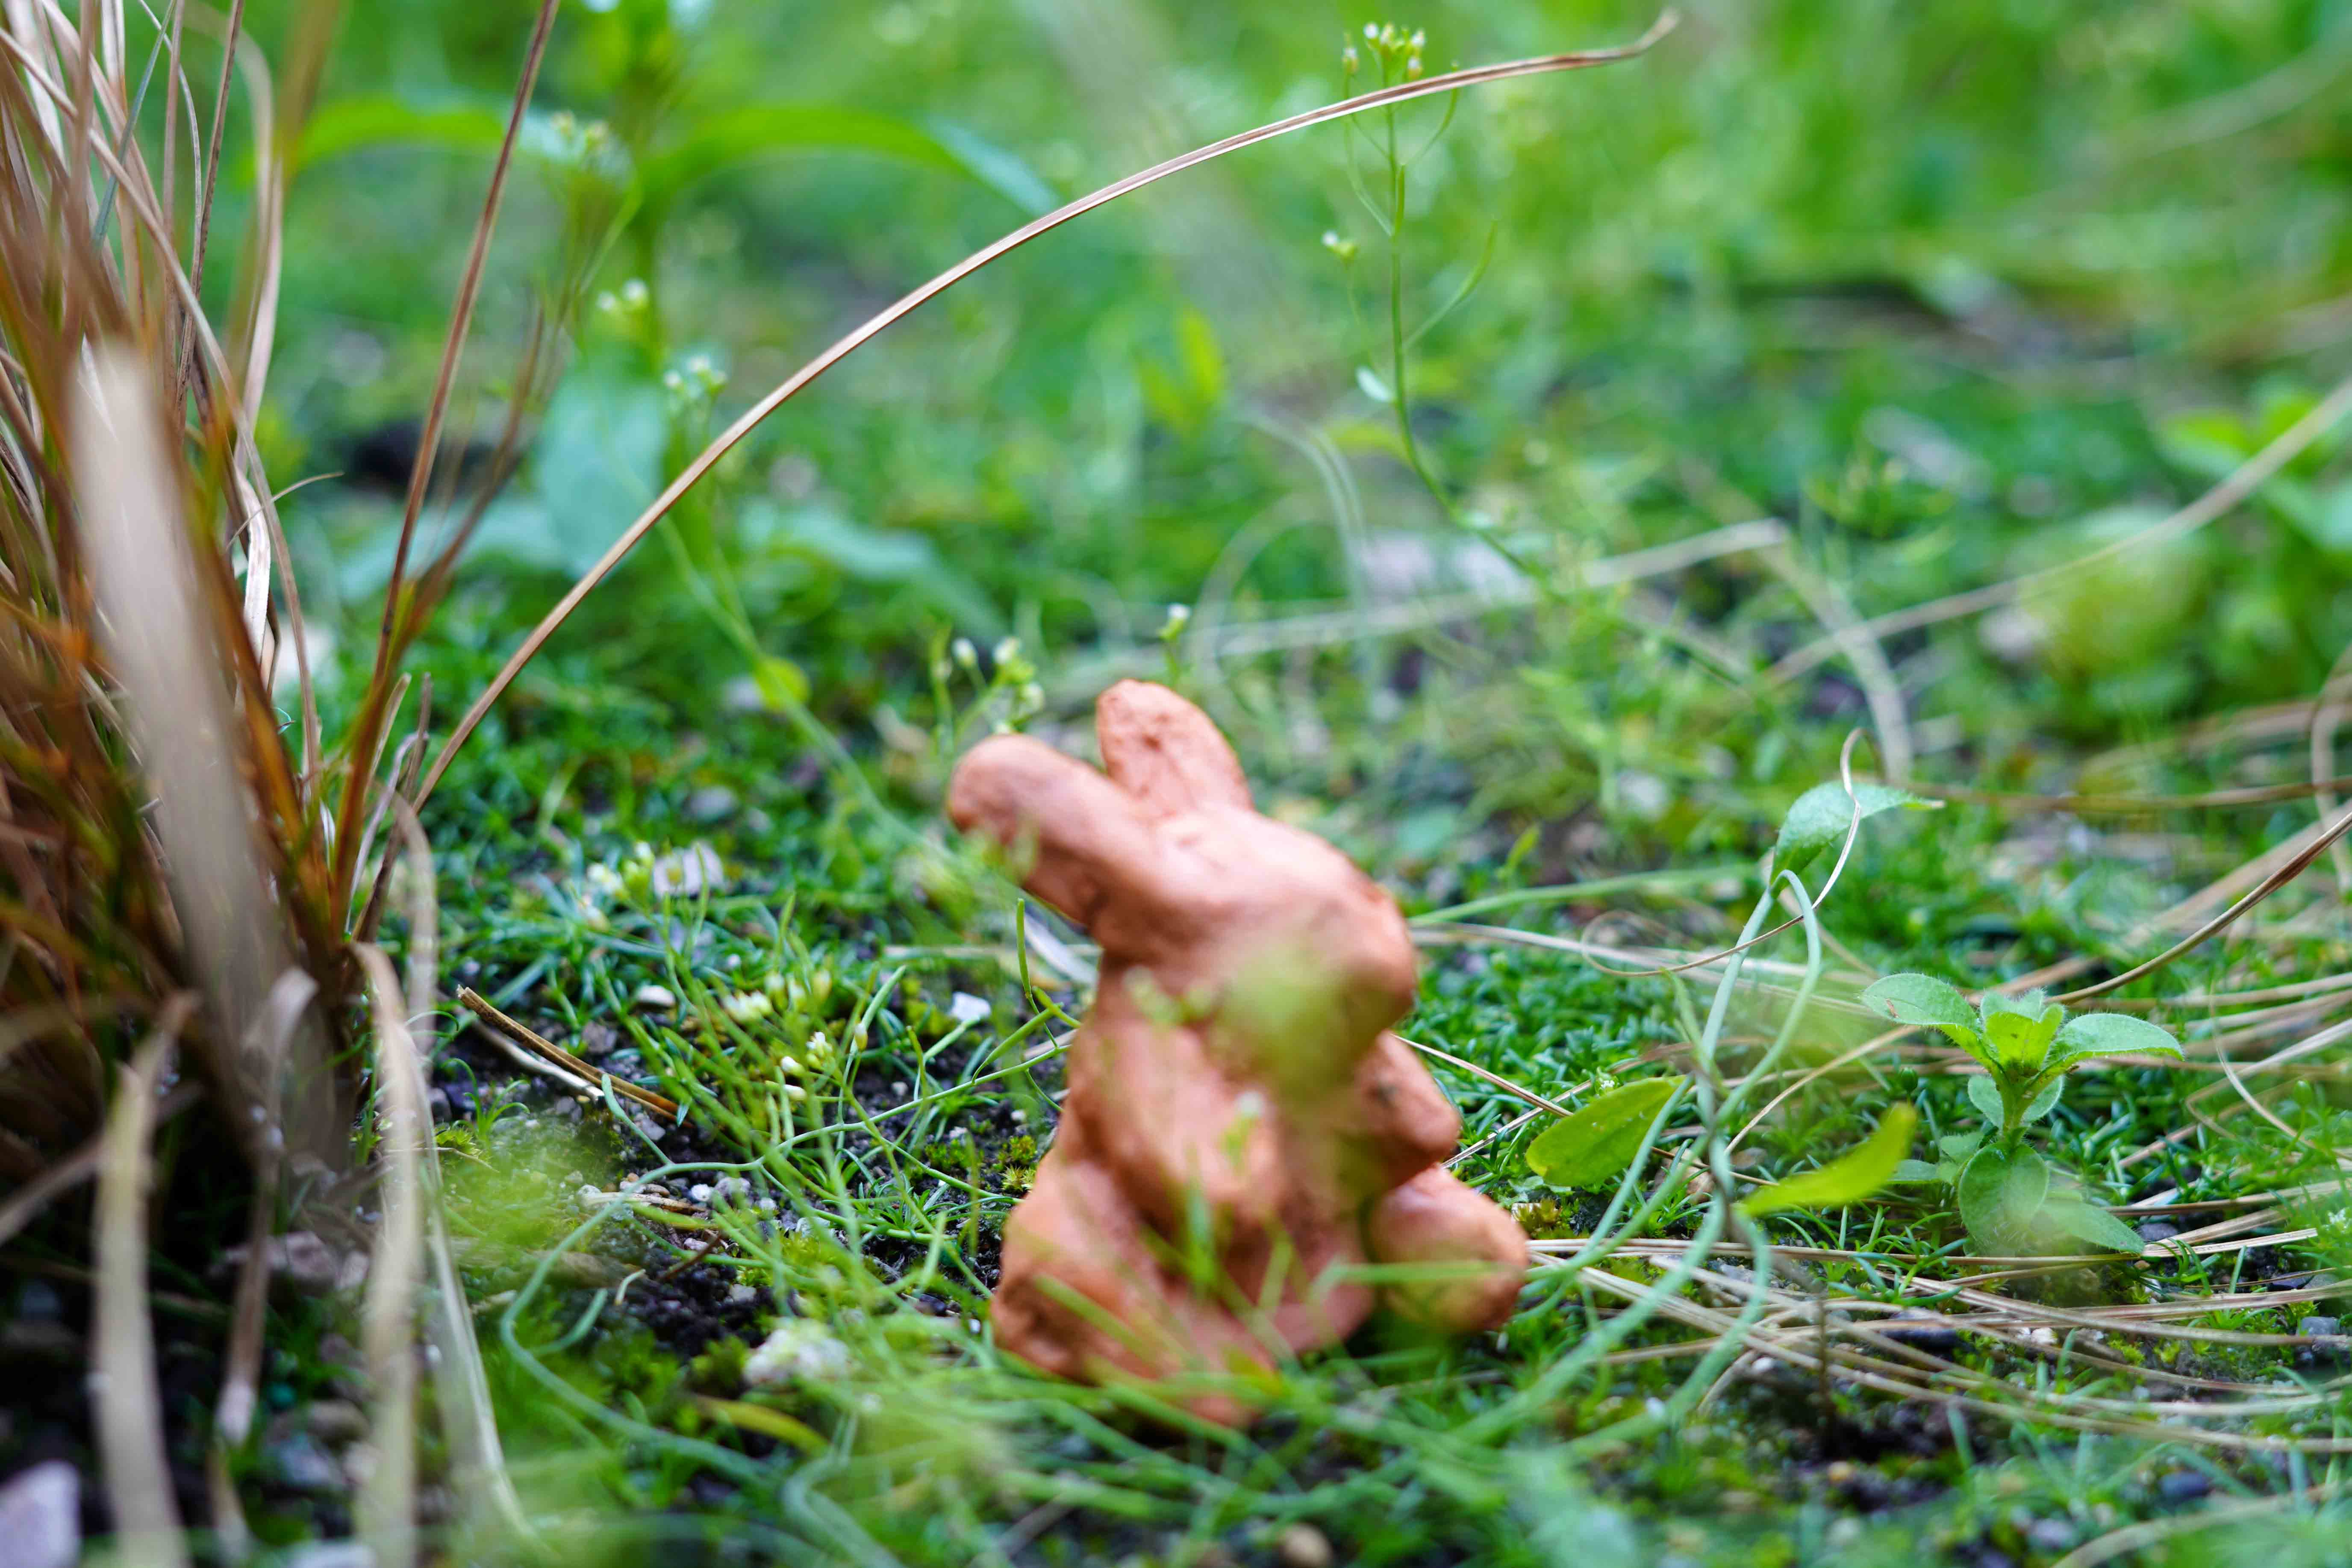 Photo of a small clay bunny sculpture outside in grass